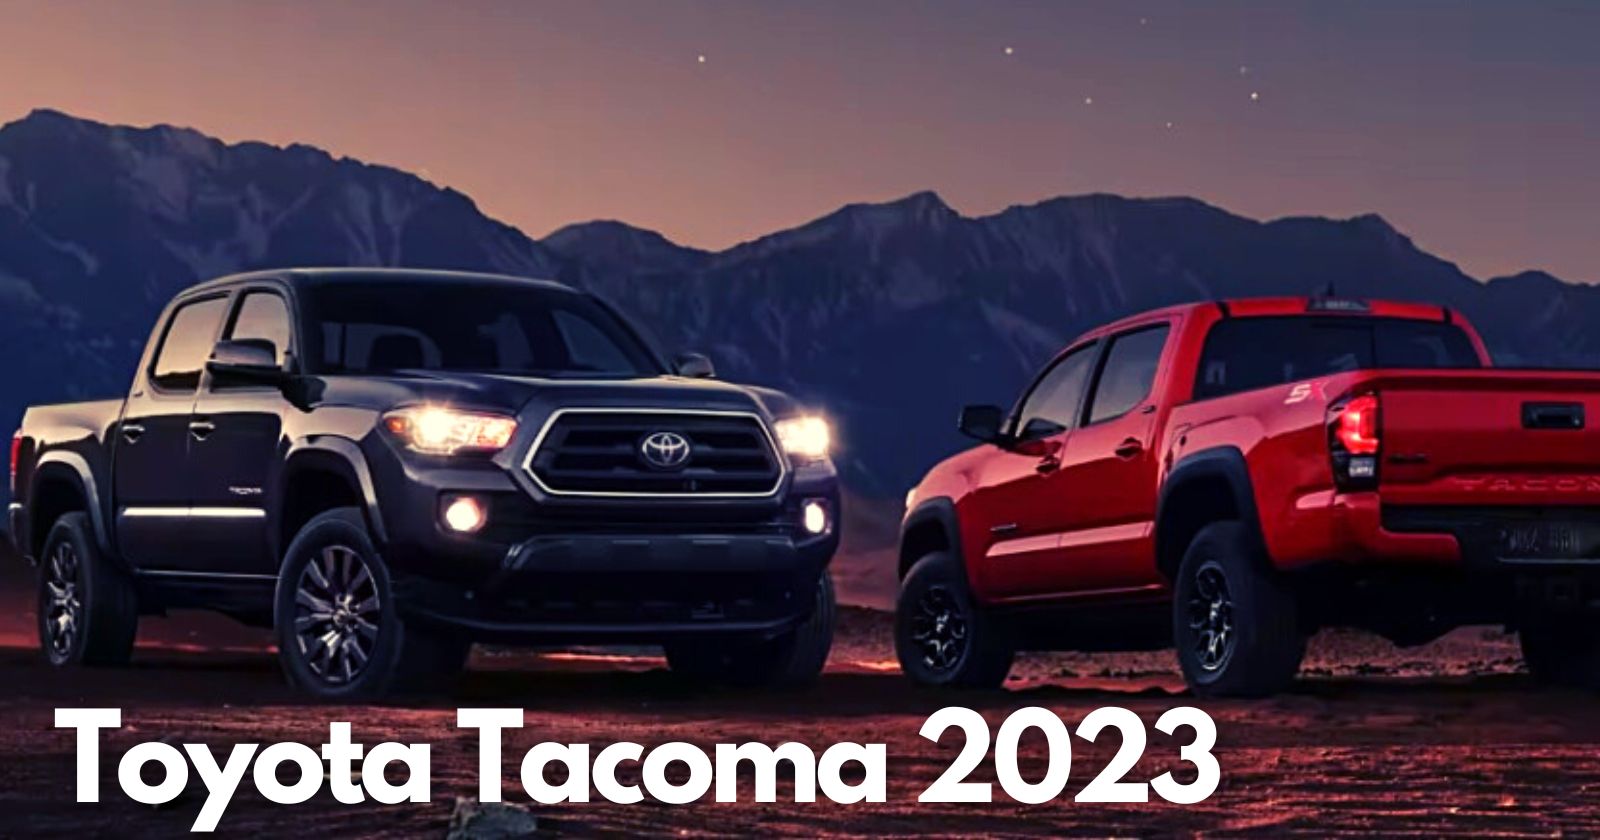 How much towing capacity of Toyota 2023 model? Unpaired